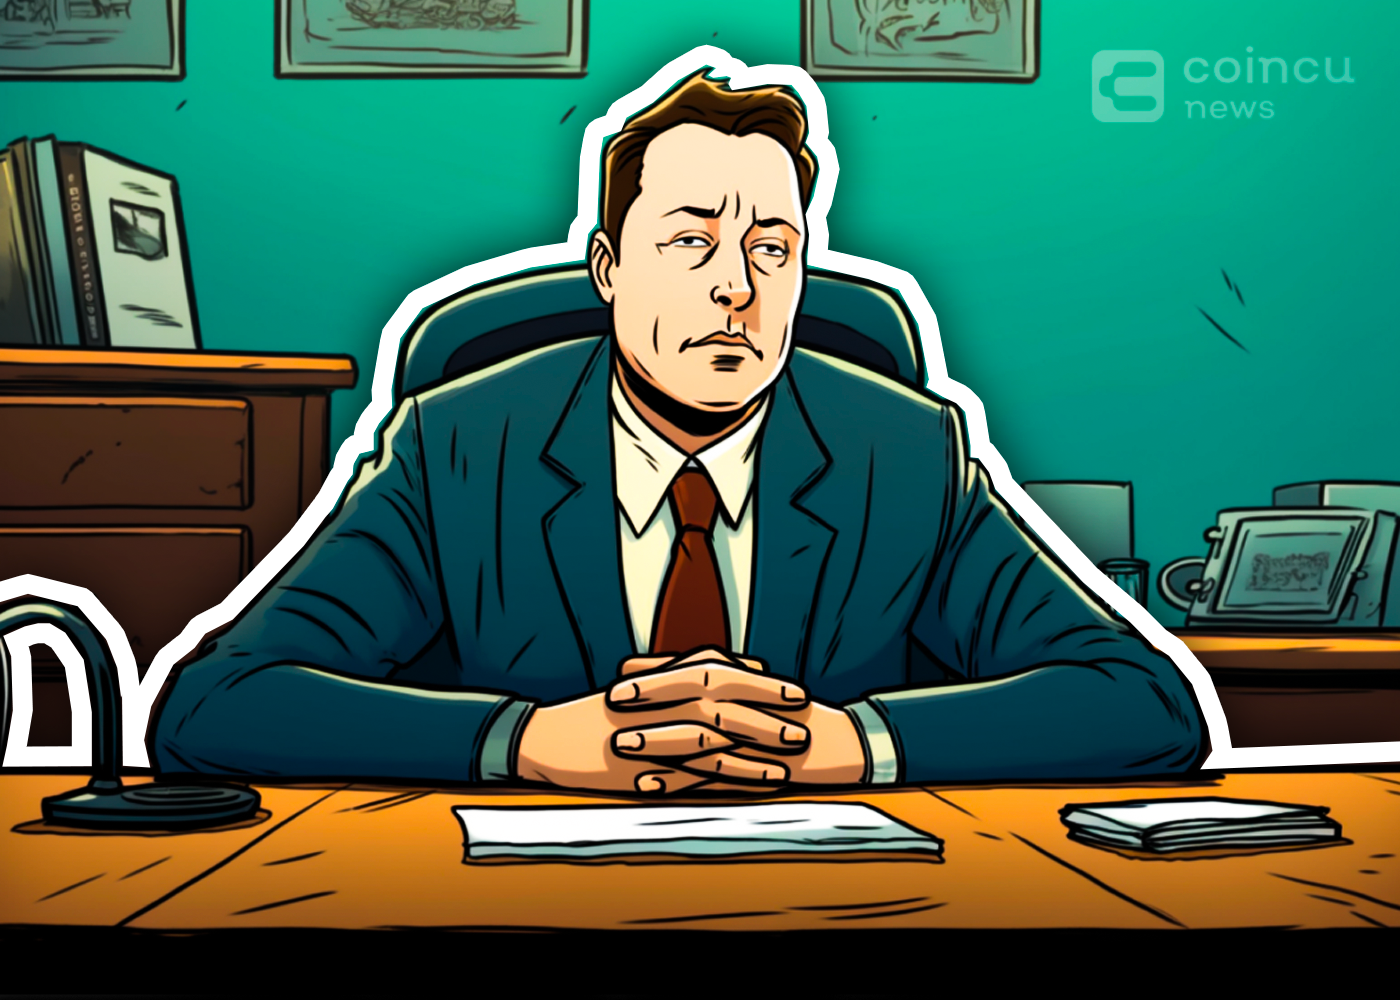 Elon-Musk-Again-Asks-To-Stop-The-Class-Action-Lawsuit-Over-Dogecoin-Insider-Trading